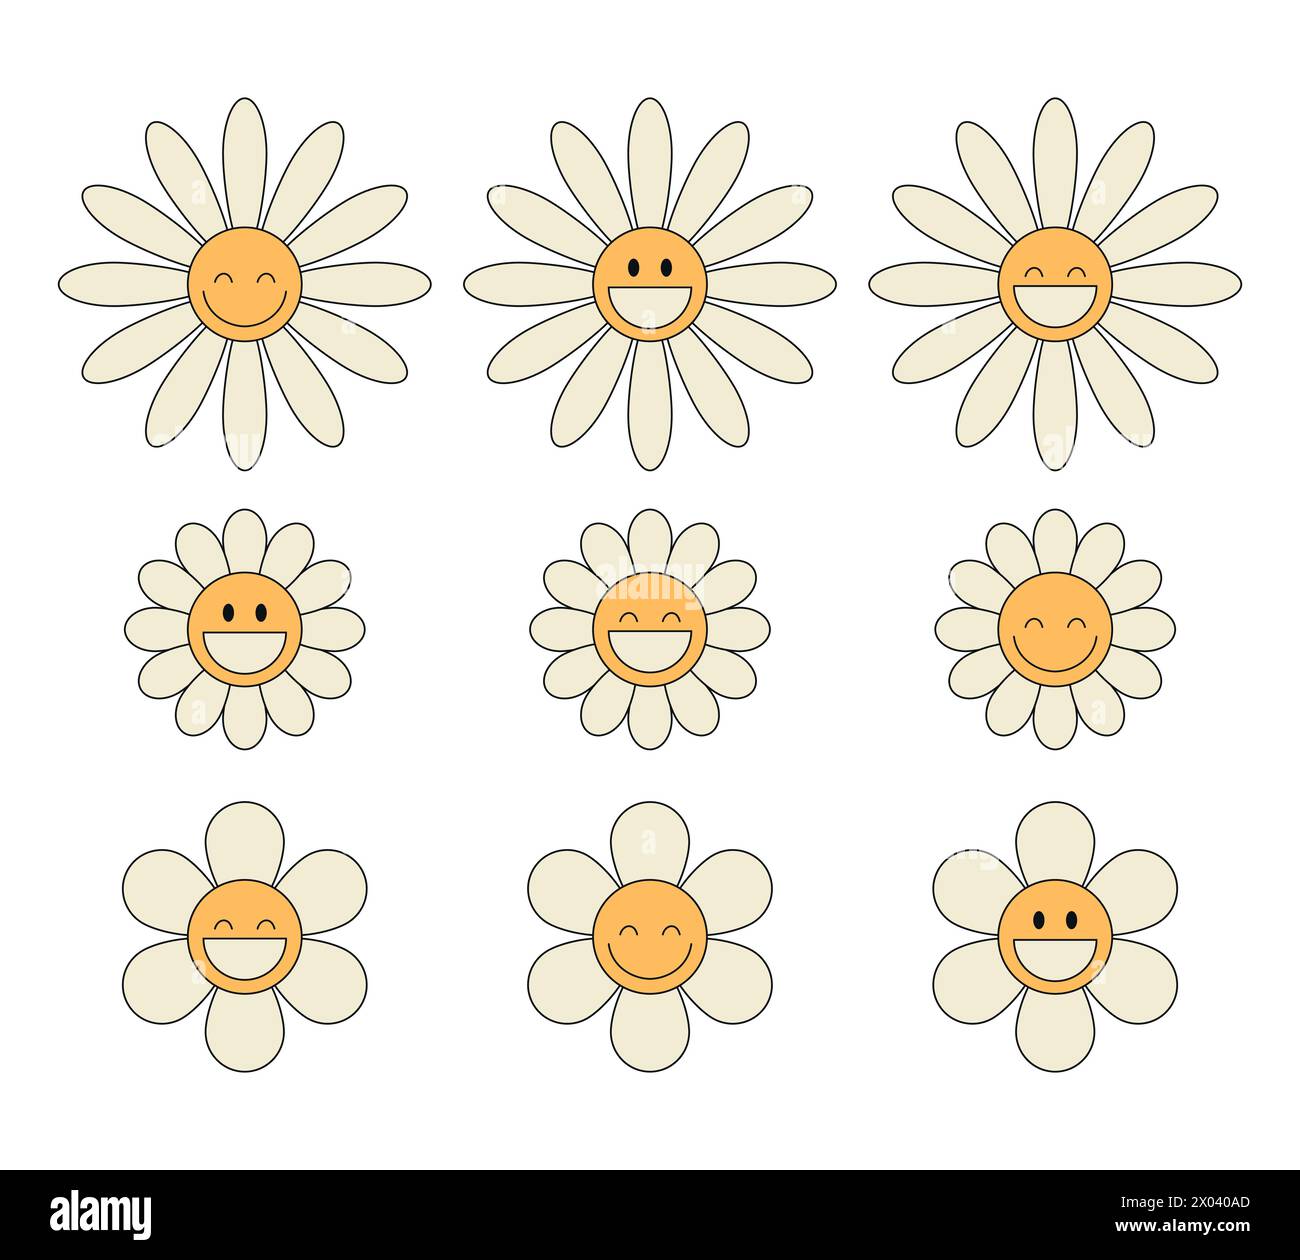 Groovy daisy chamomile flower characters set. Hippie retro style. Flower icons. Vector illustration Stock Vector